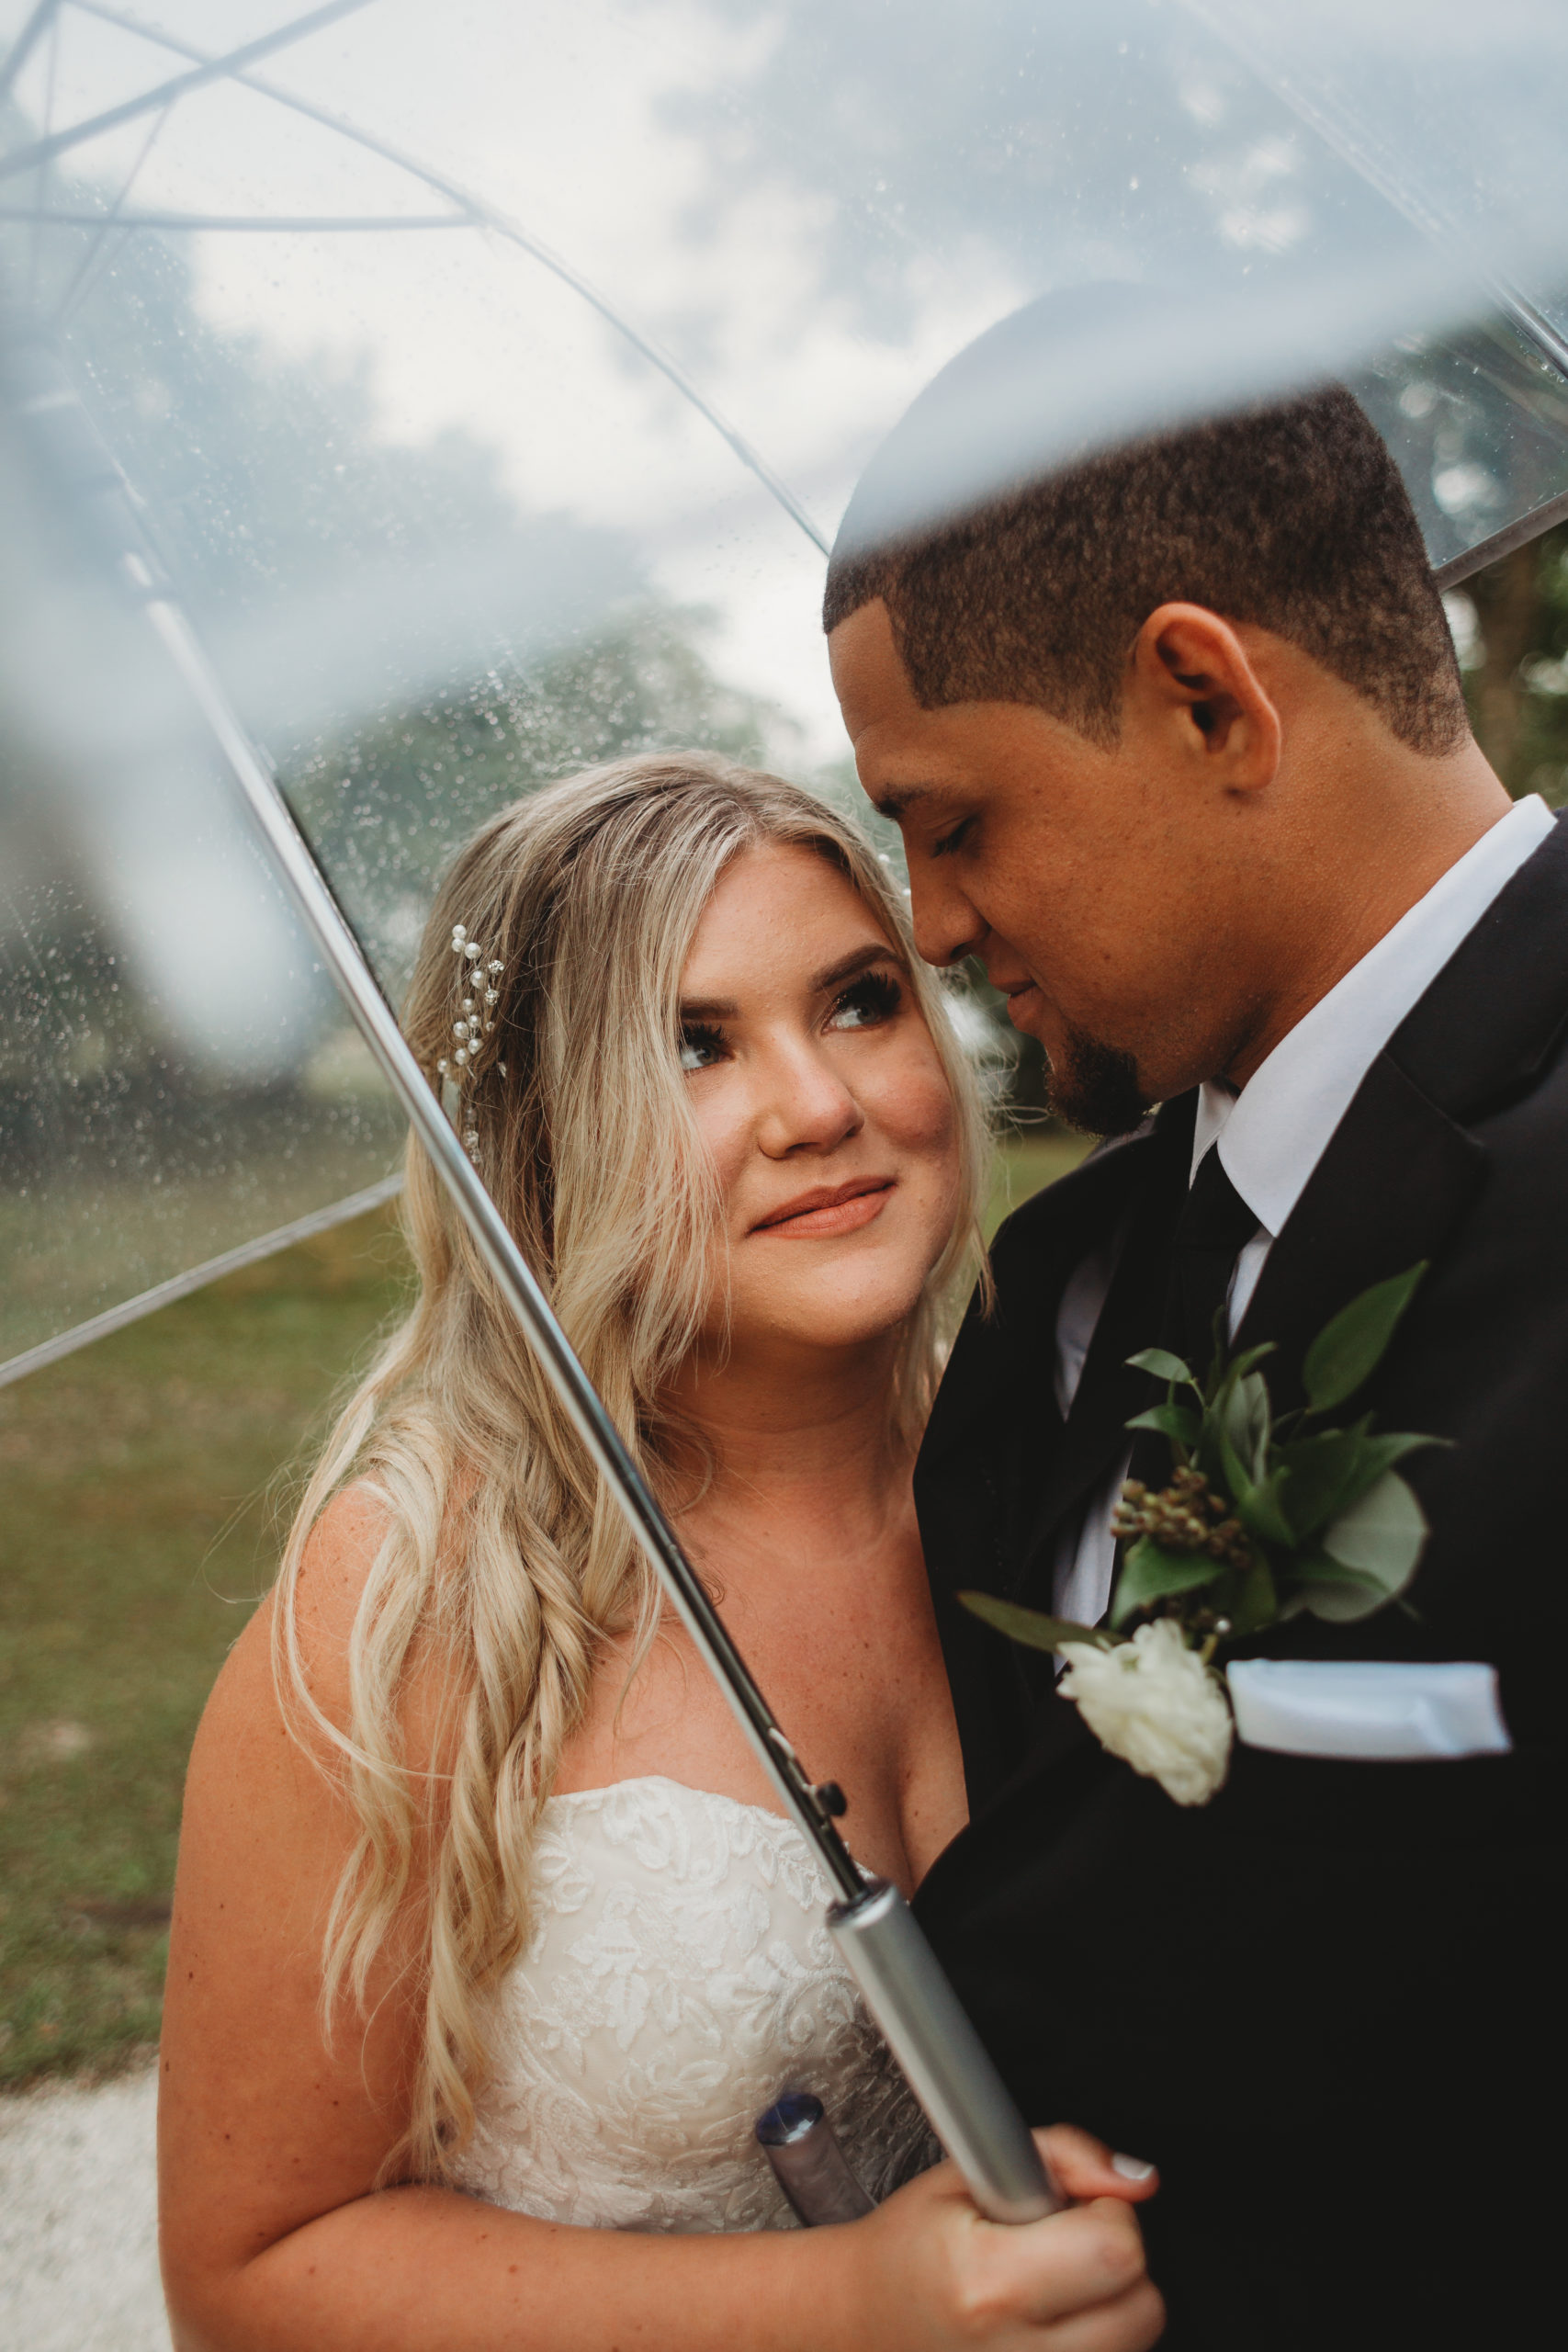 Vero Beach Wedding, bride and groom holding a clear umbrella to get out of the rain on their Florida wedding day